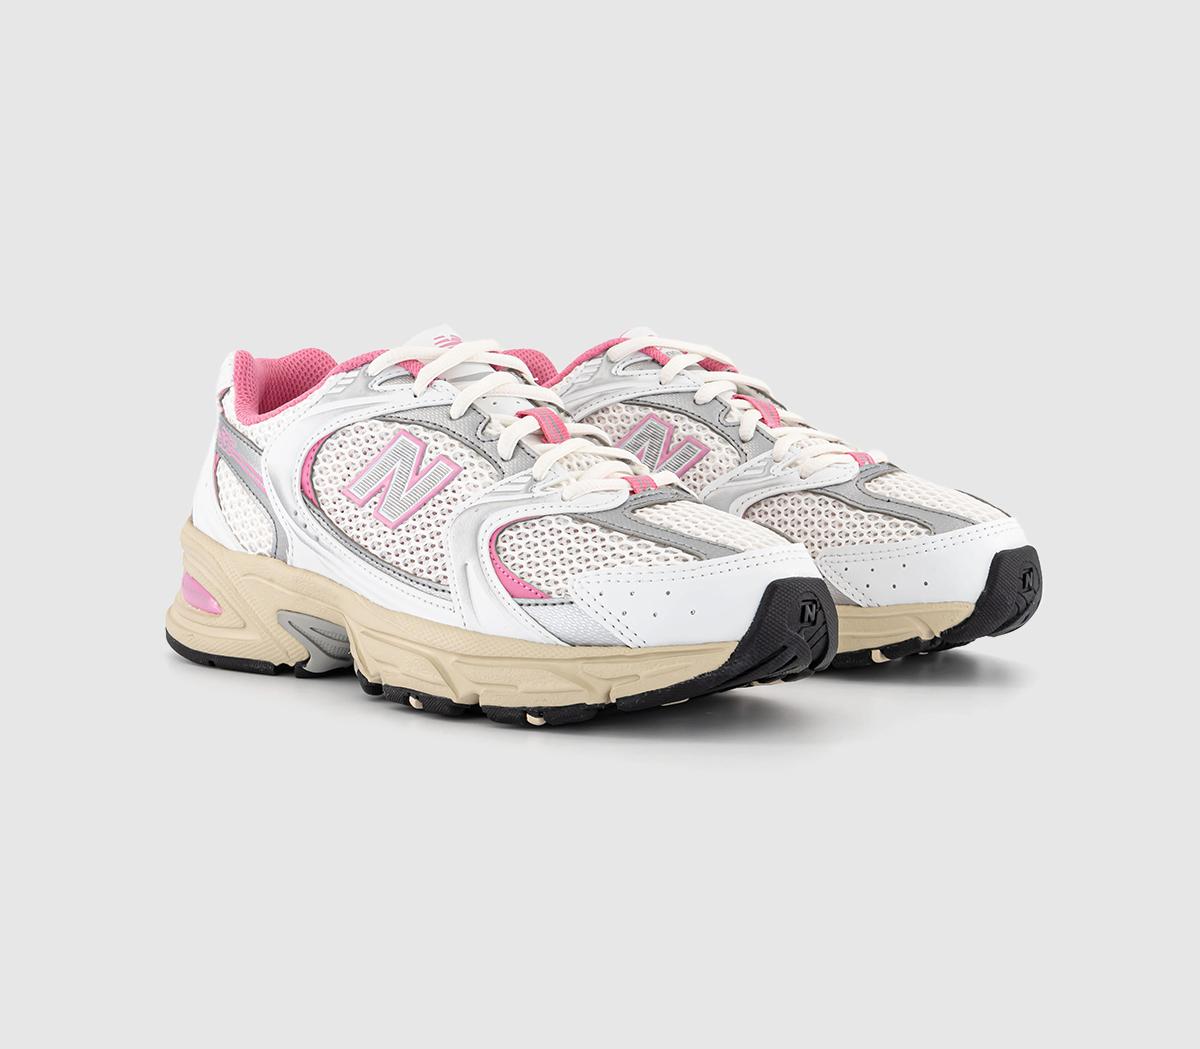 New Balance Womens Mr530 Trainers Off White Pink Silver, 7